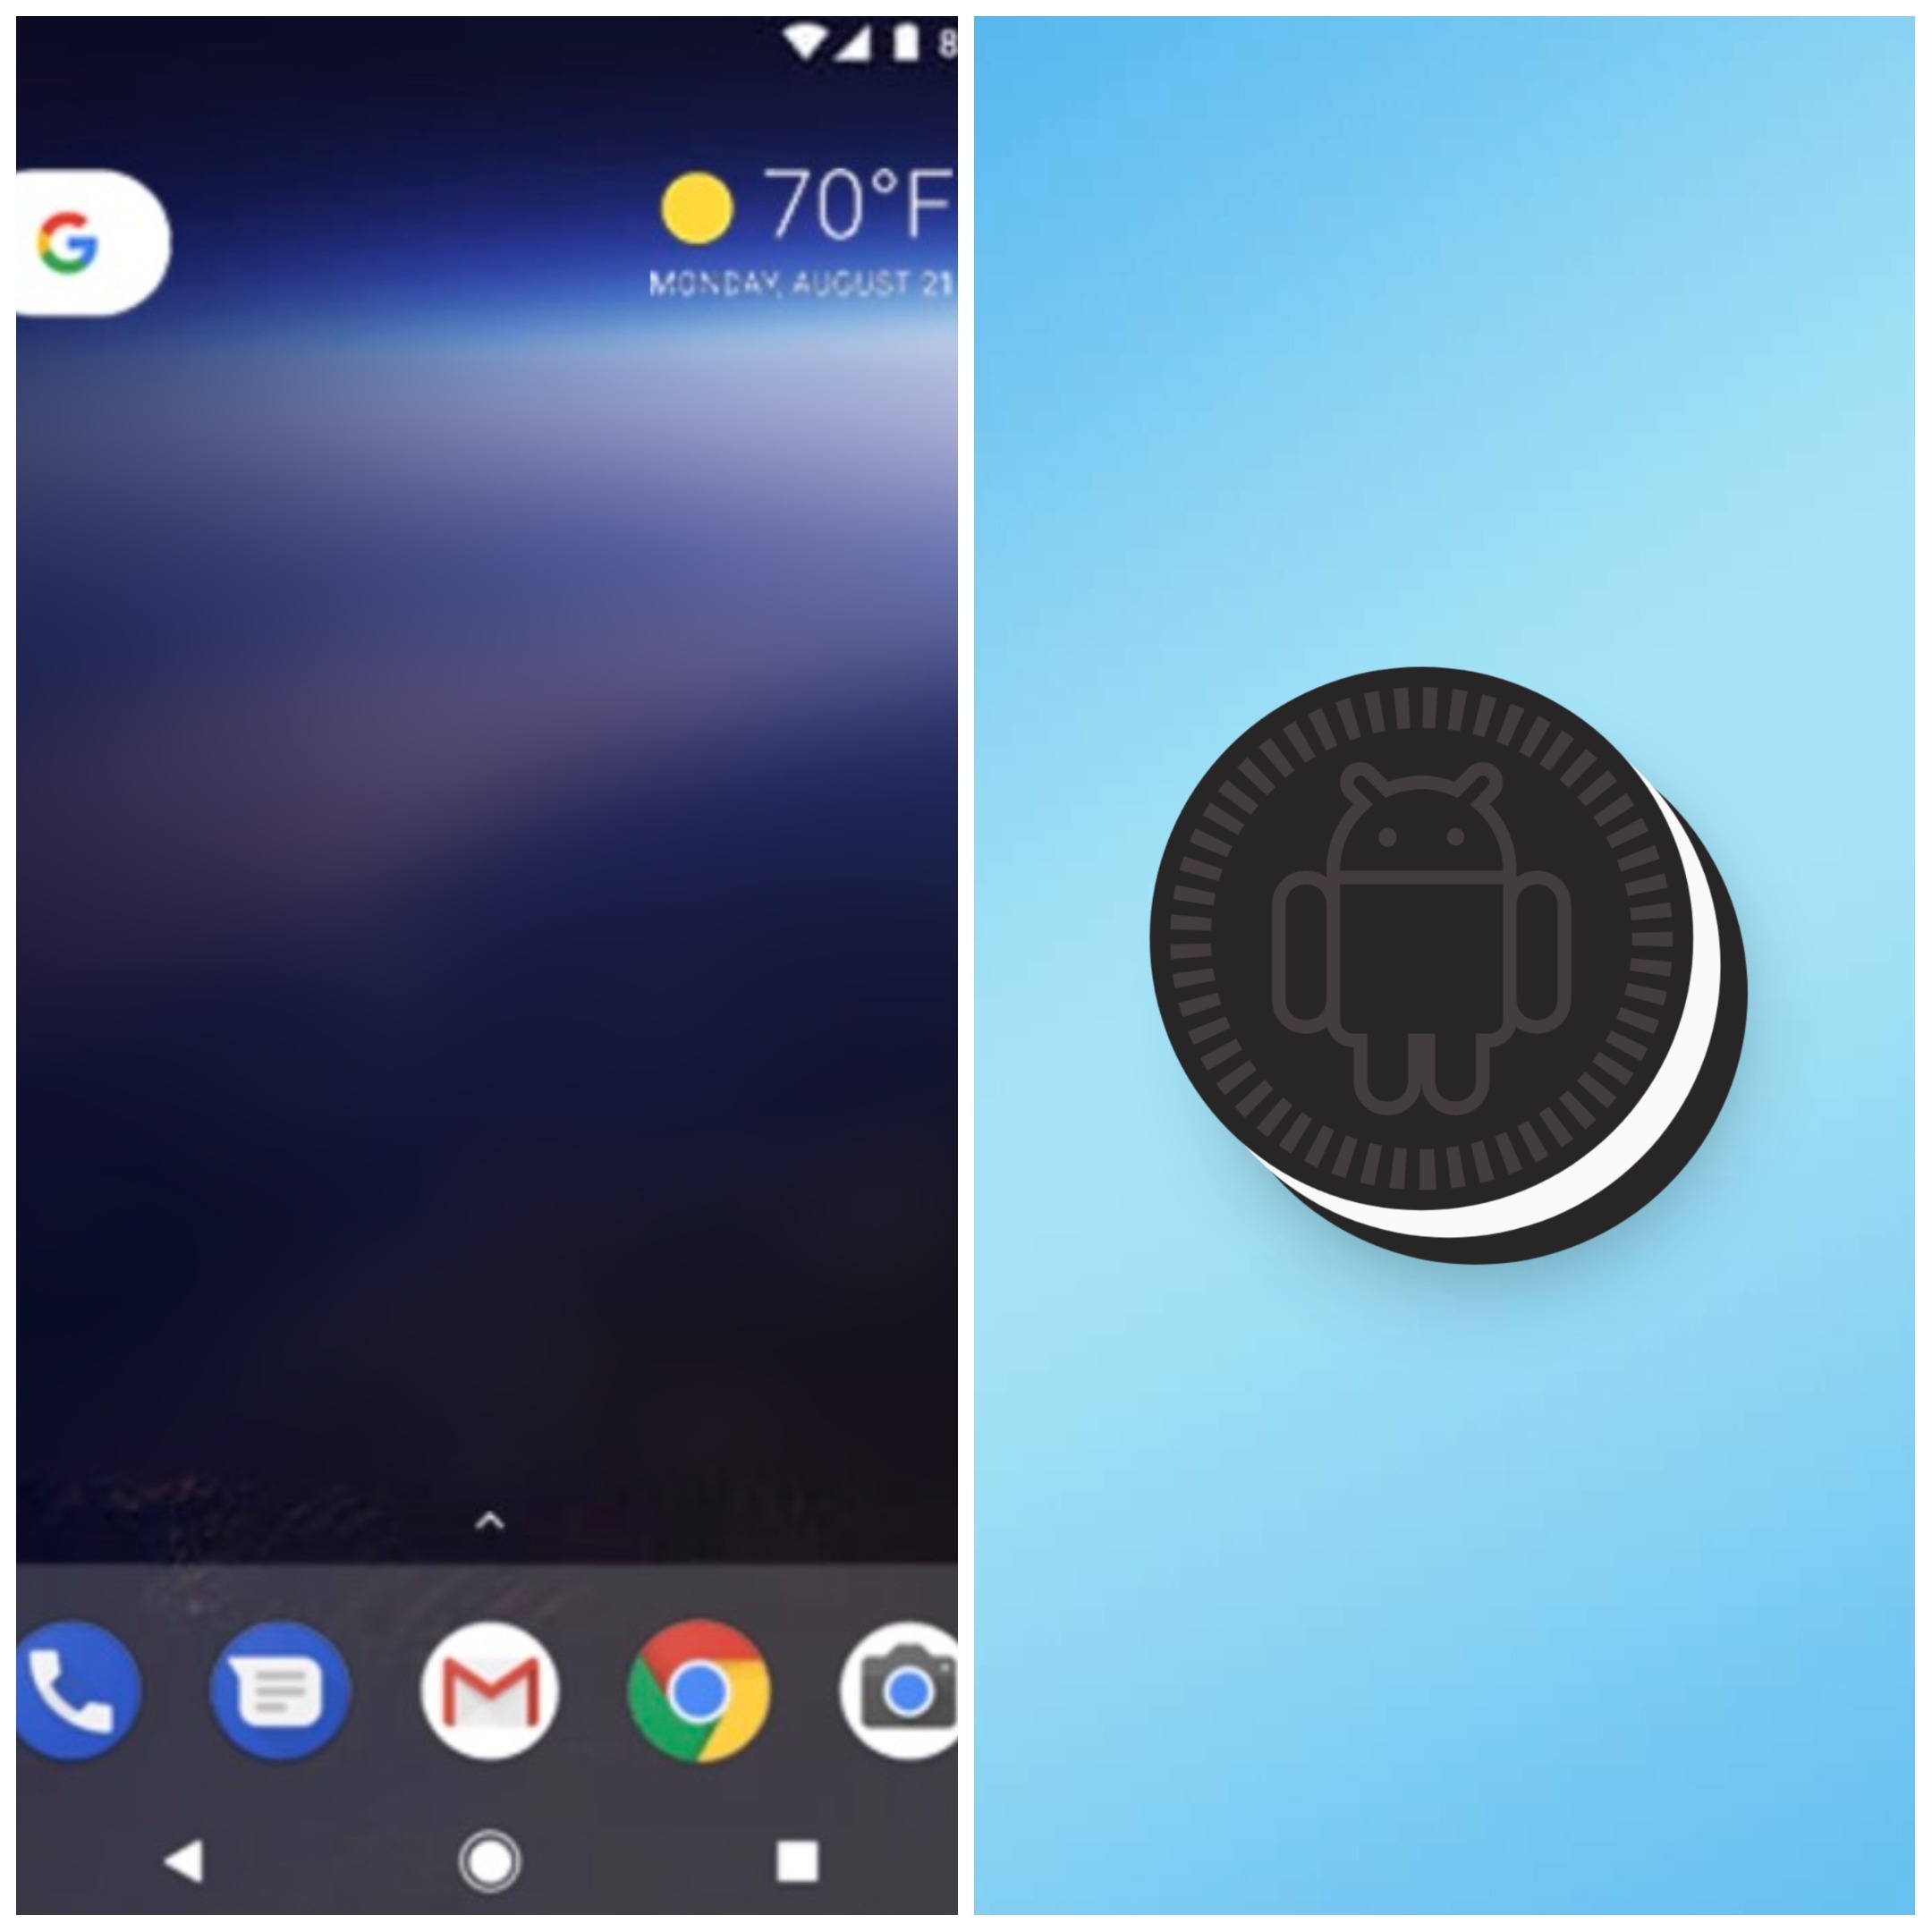 The history of Android Oreo